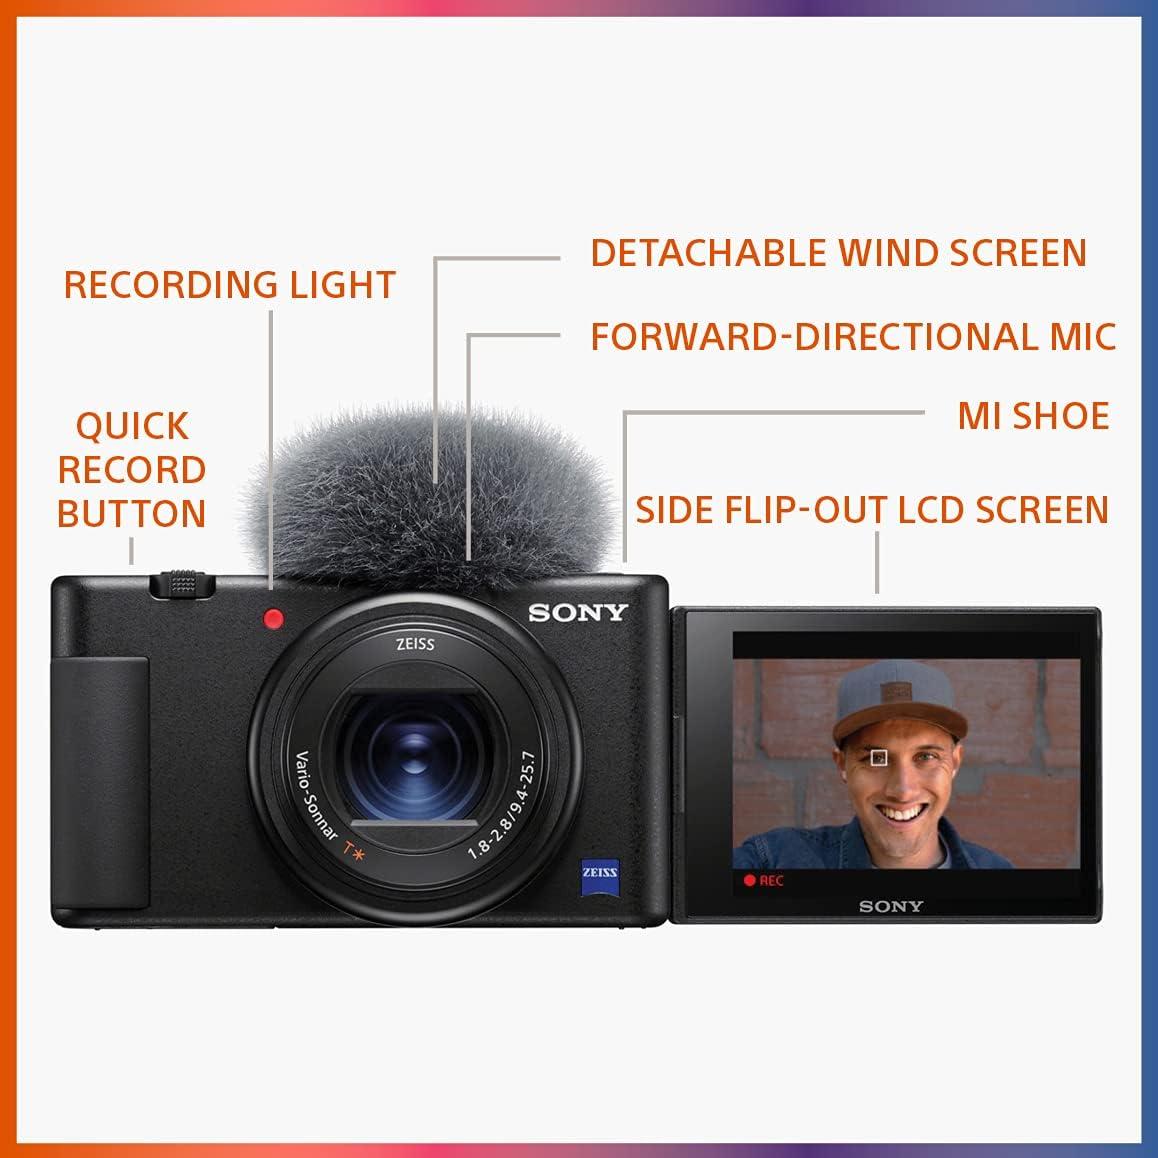  Sony ZV-1 Digital Camera for Content Creators, Vlogging and   with Flip Screen, Touchscreen Display, Live Video Streaming, Webcam  with Vlogger Shotgun Microphone ECM-G1 Black : Electronics